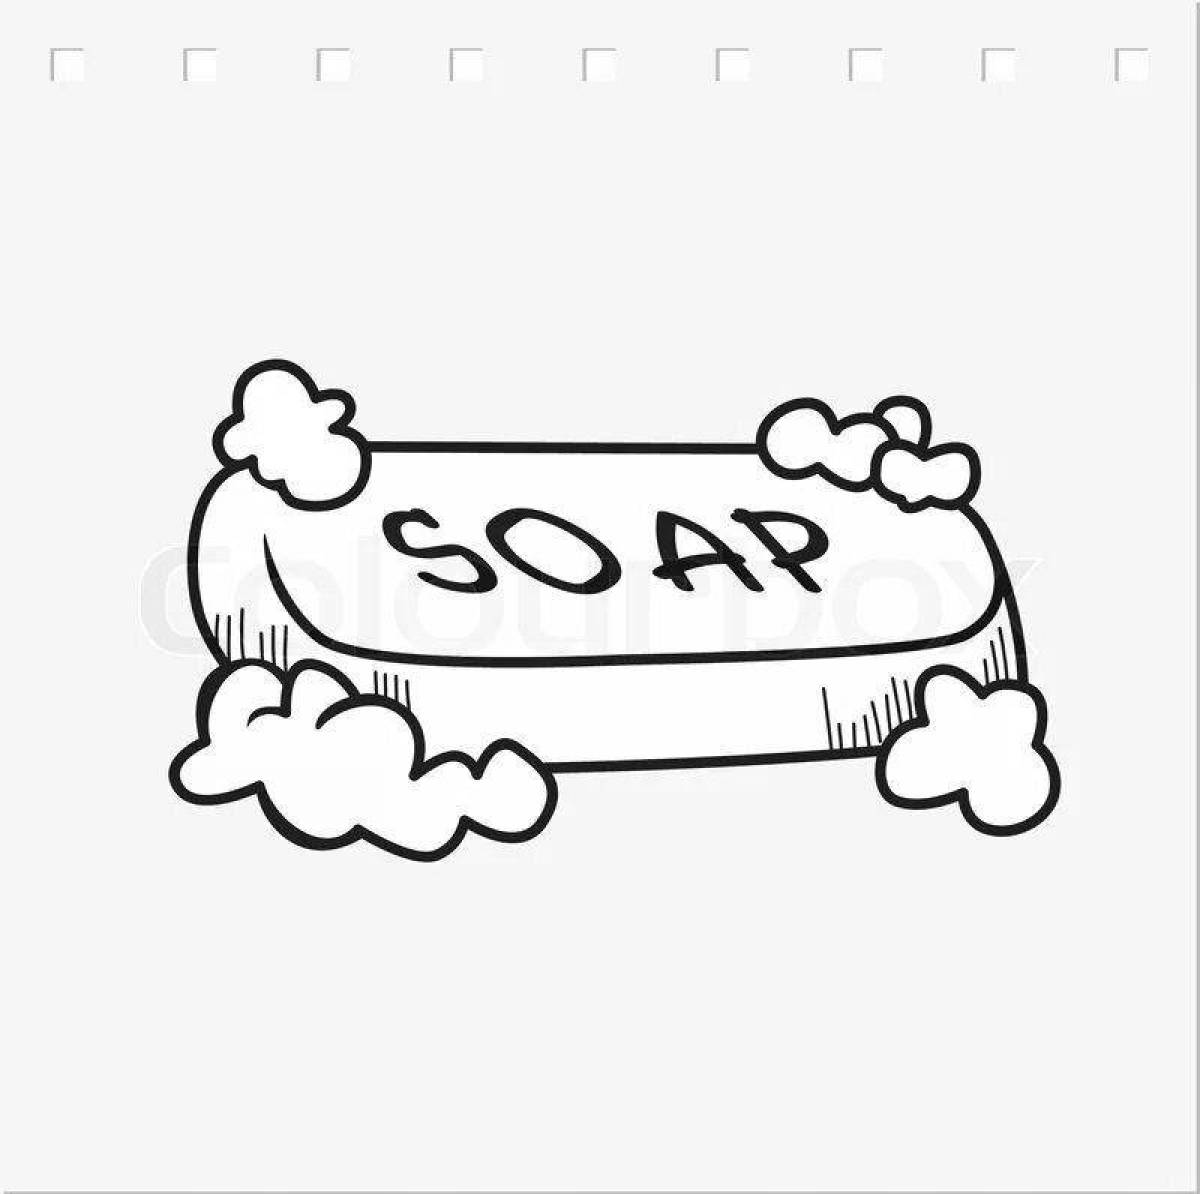 Exciting soap coloring page for little learners